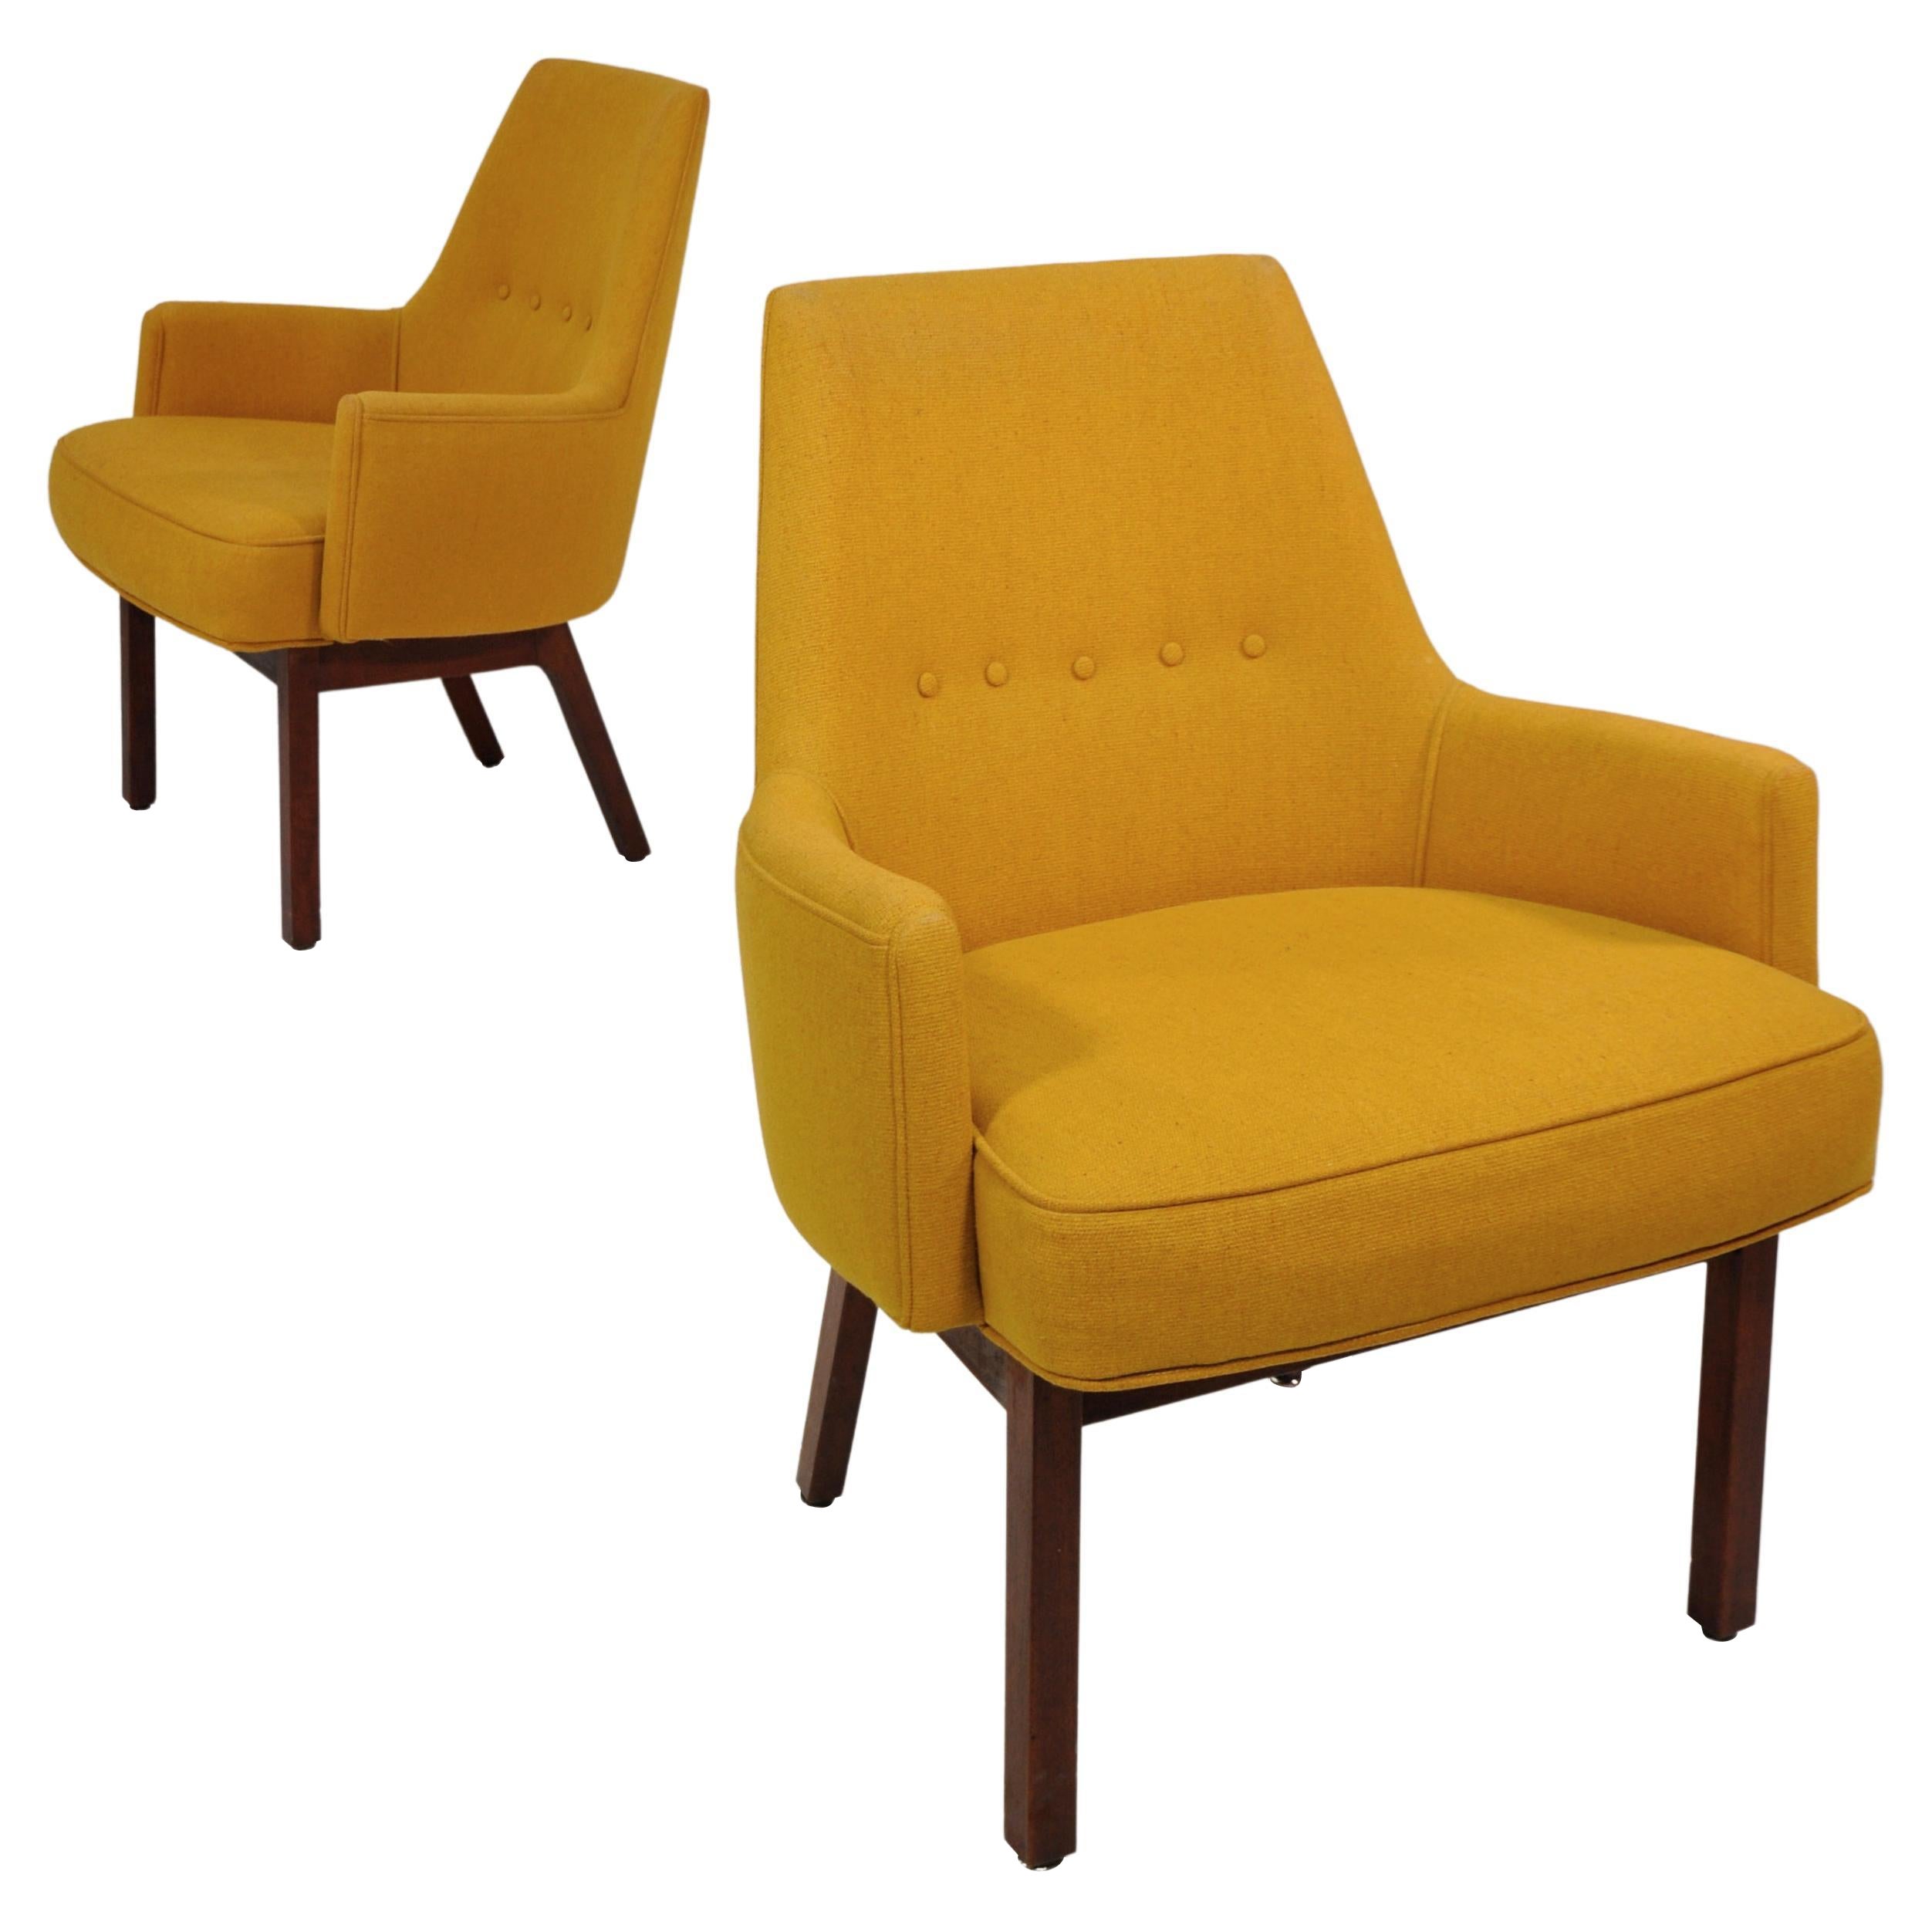 American Yellow Wool Walnut Lounge Chairs by Vista of California, a Pair For Sale